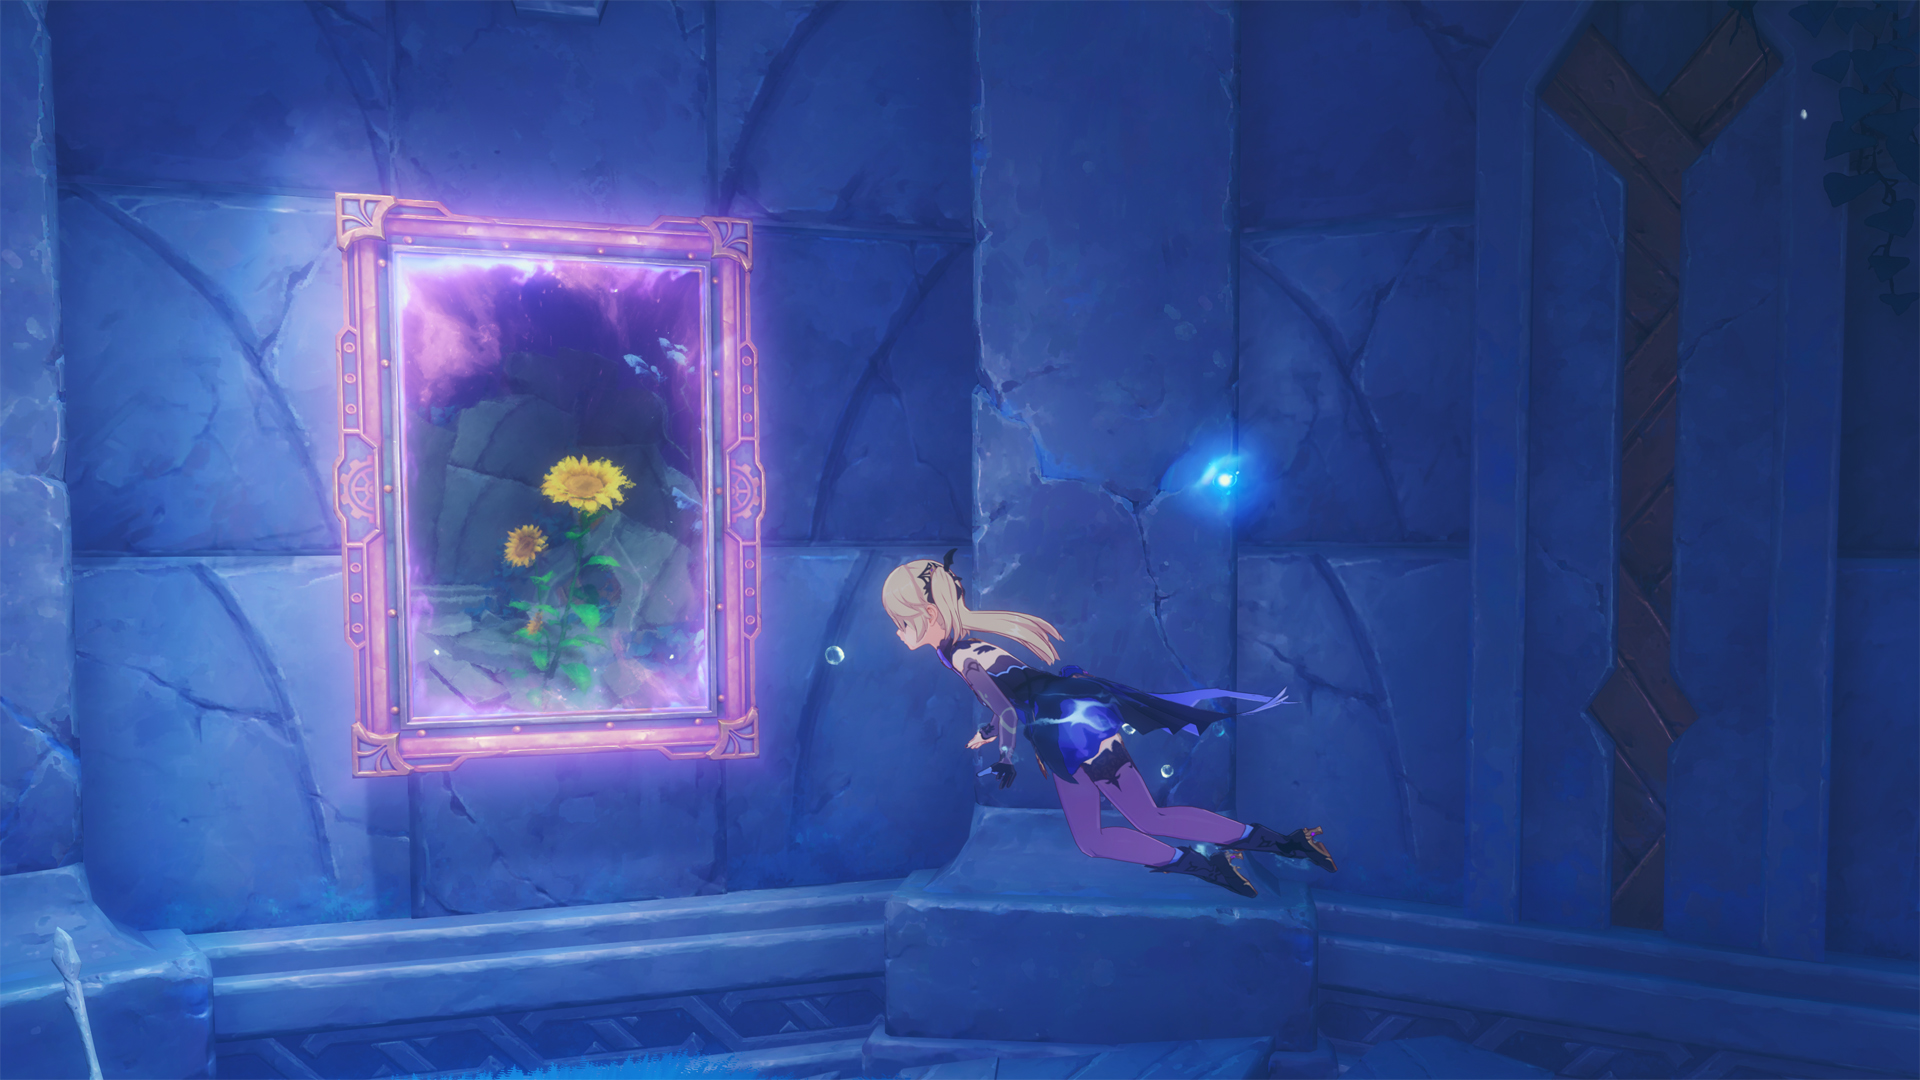 A character with blond hair flies into a purple mirror in Genshin Impact.